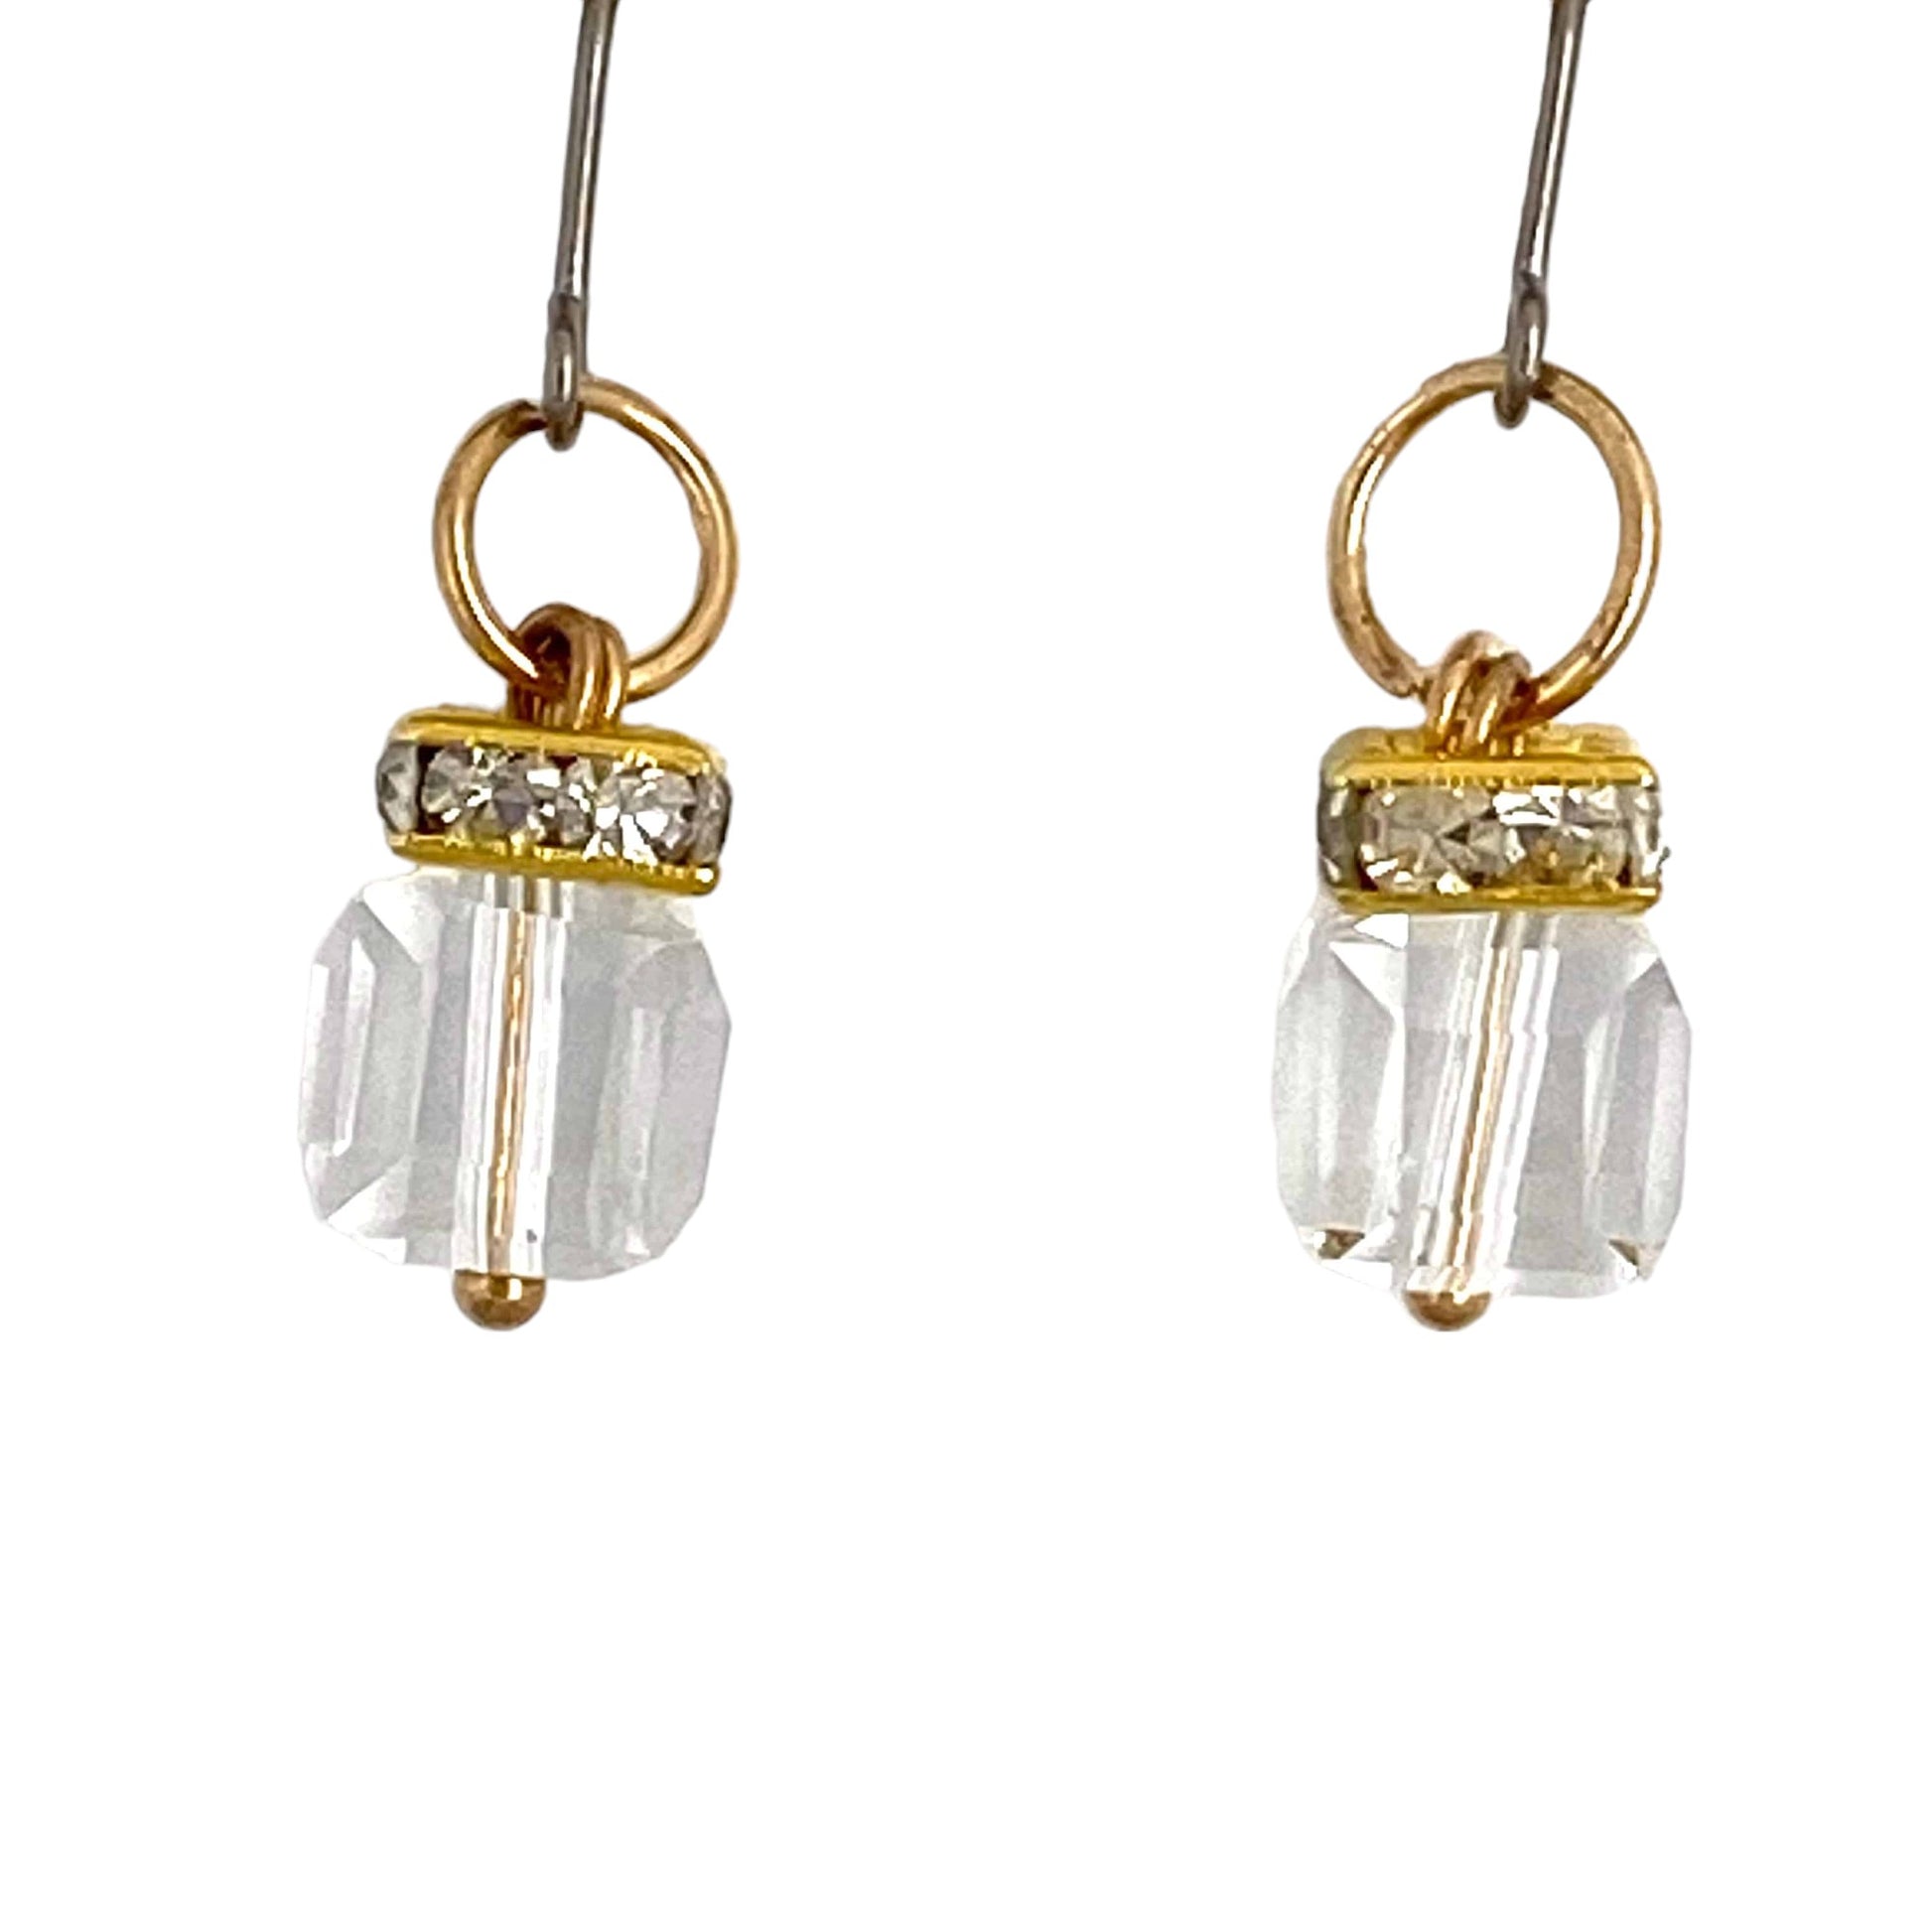 Crystal Clutch earrings with titanium hooks. A flashing crystal with a gold